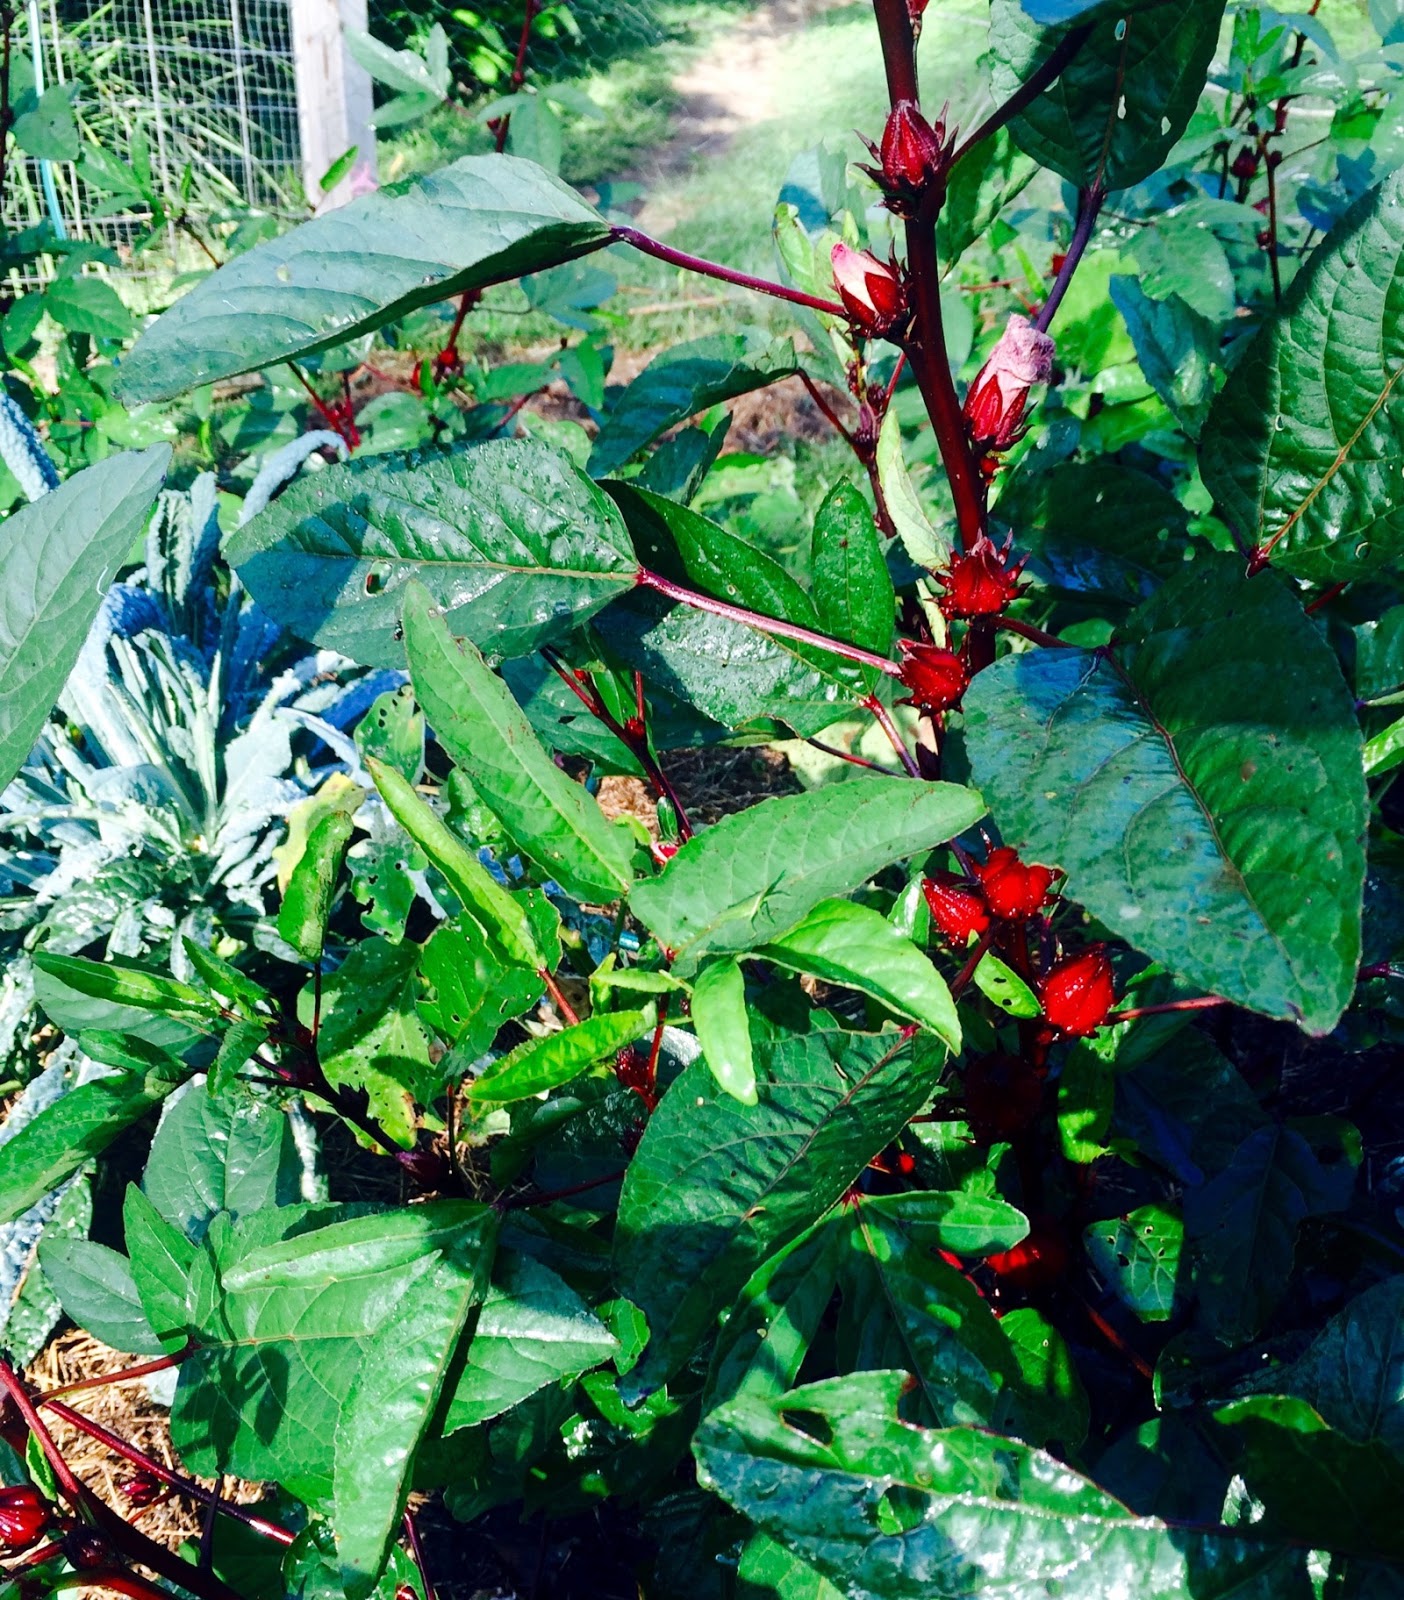 How to Harvest and Use sabdariffa) Our Permaculture Life